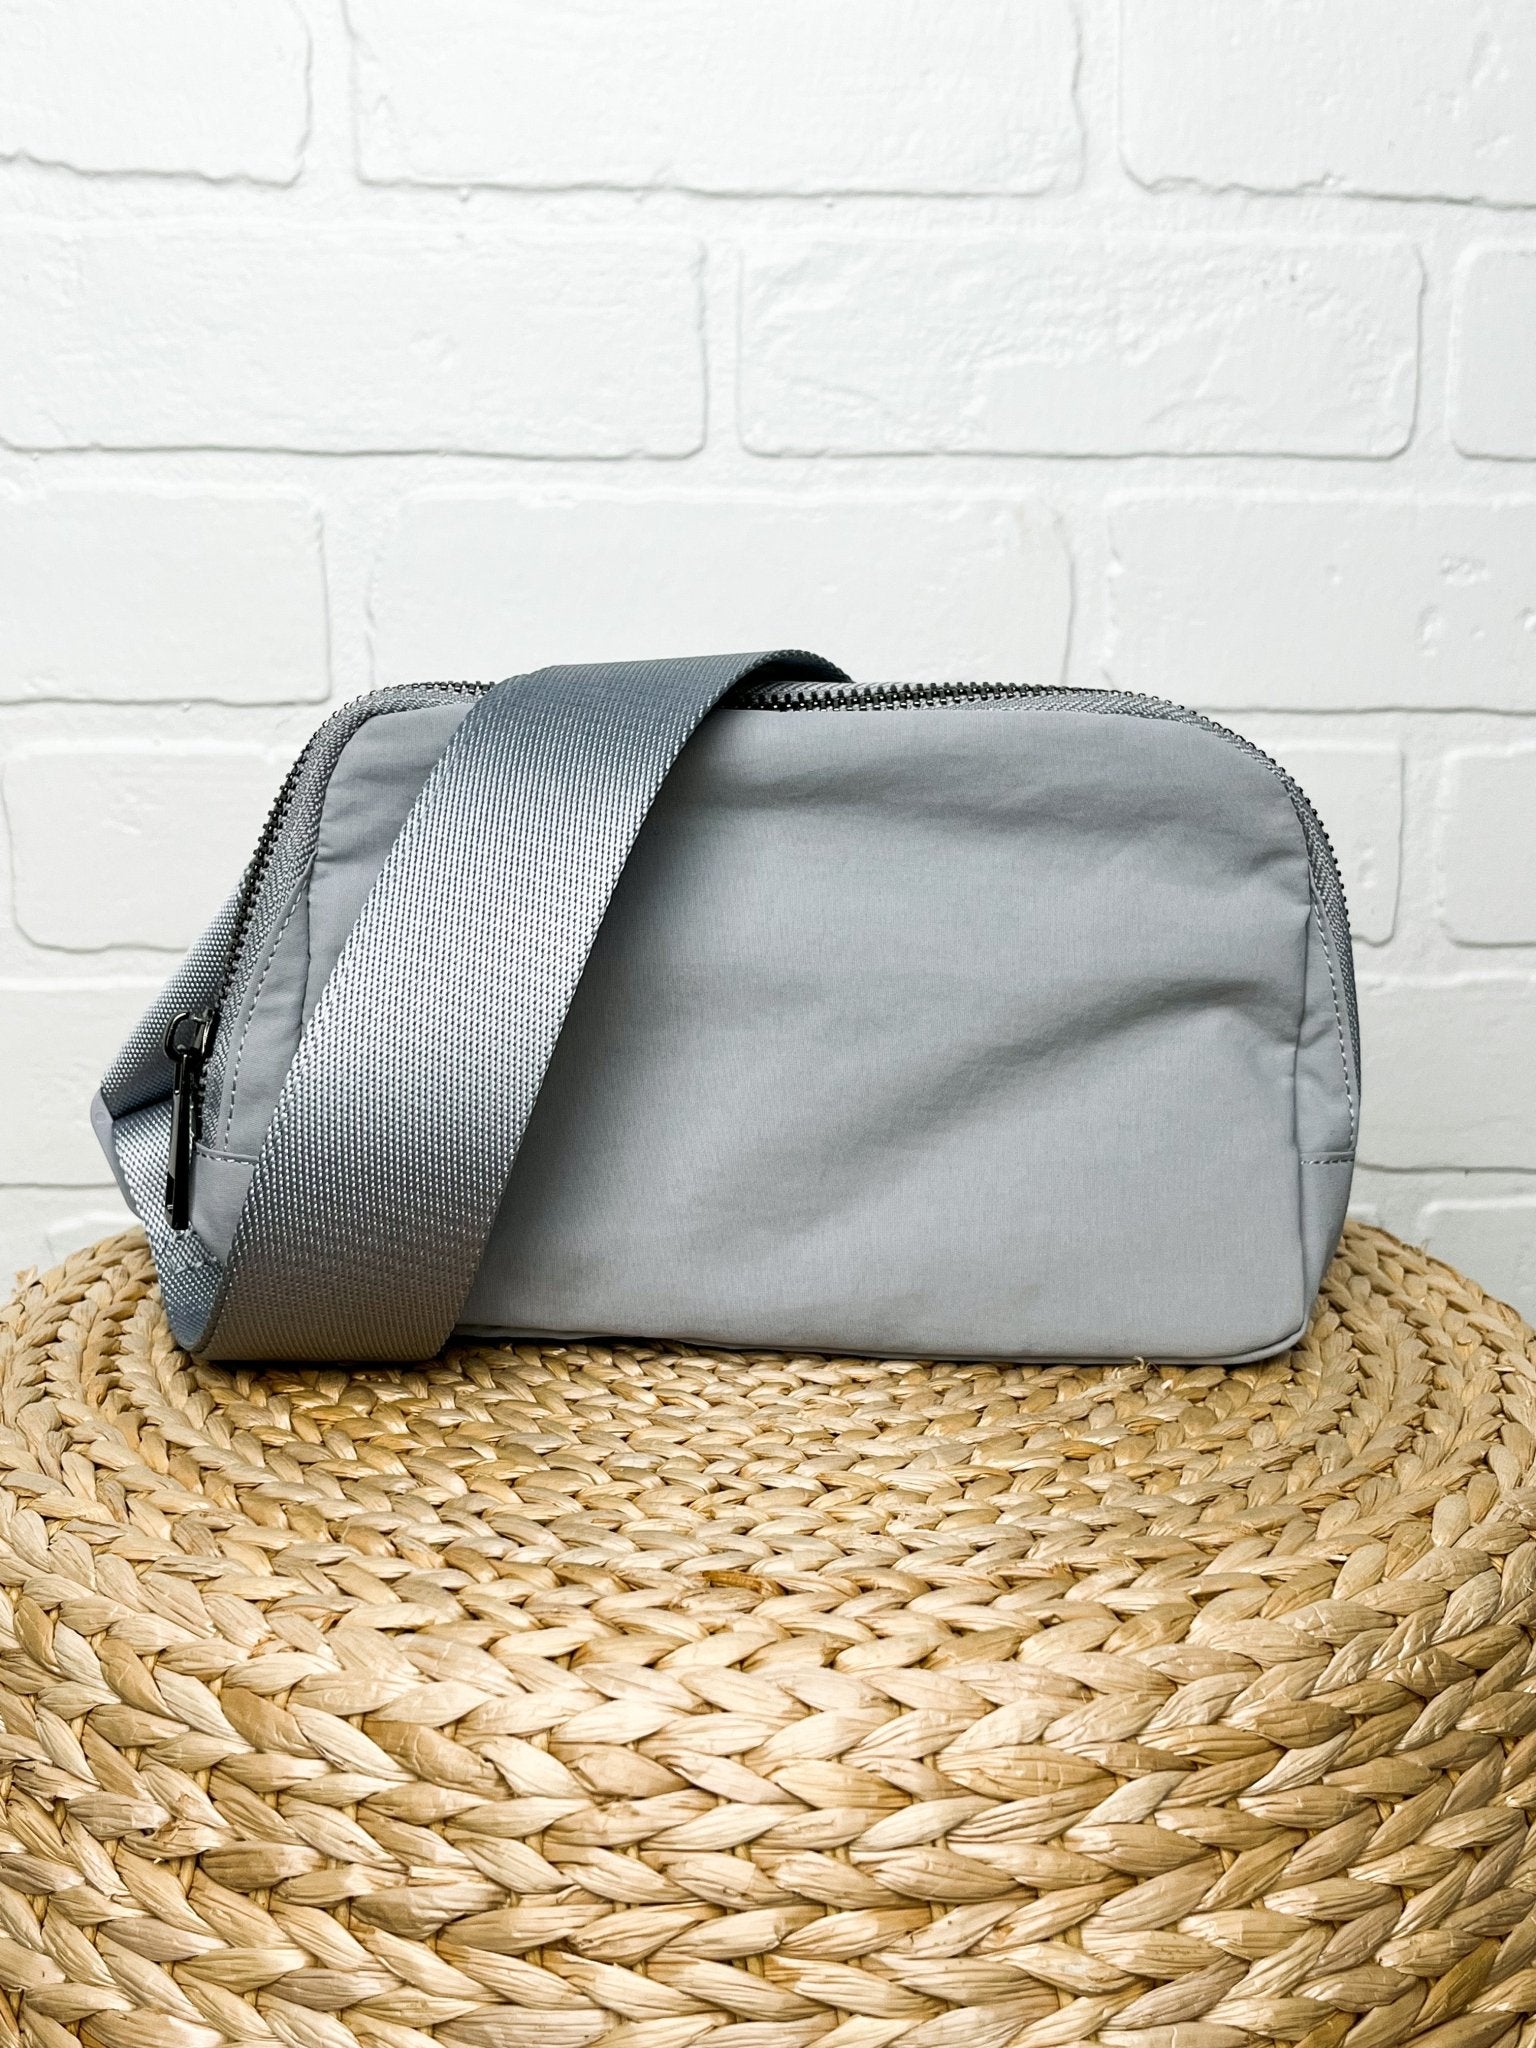 Sling belt bag grey - Trendy Bags at Lush Fashion Lounge Boutique in Oklahoma City